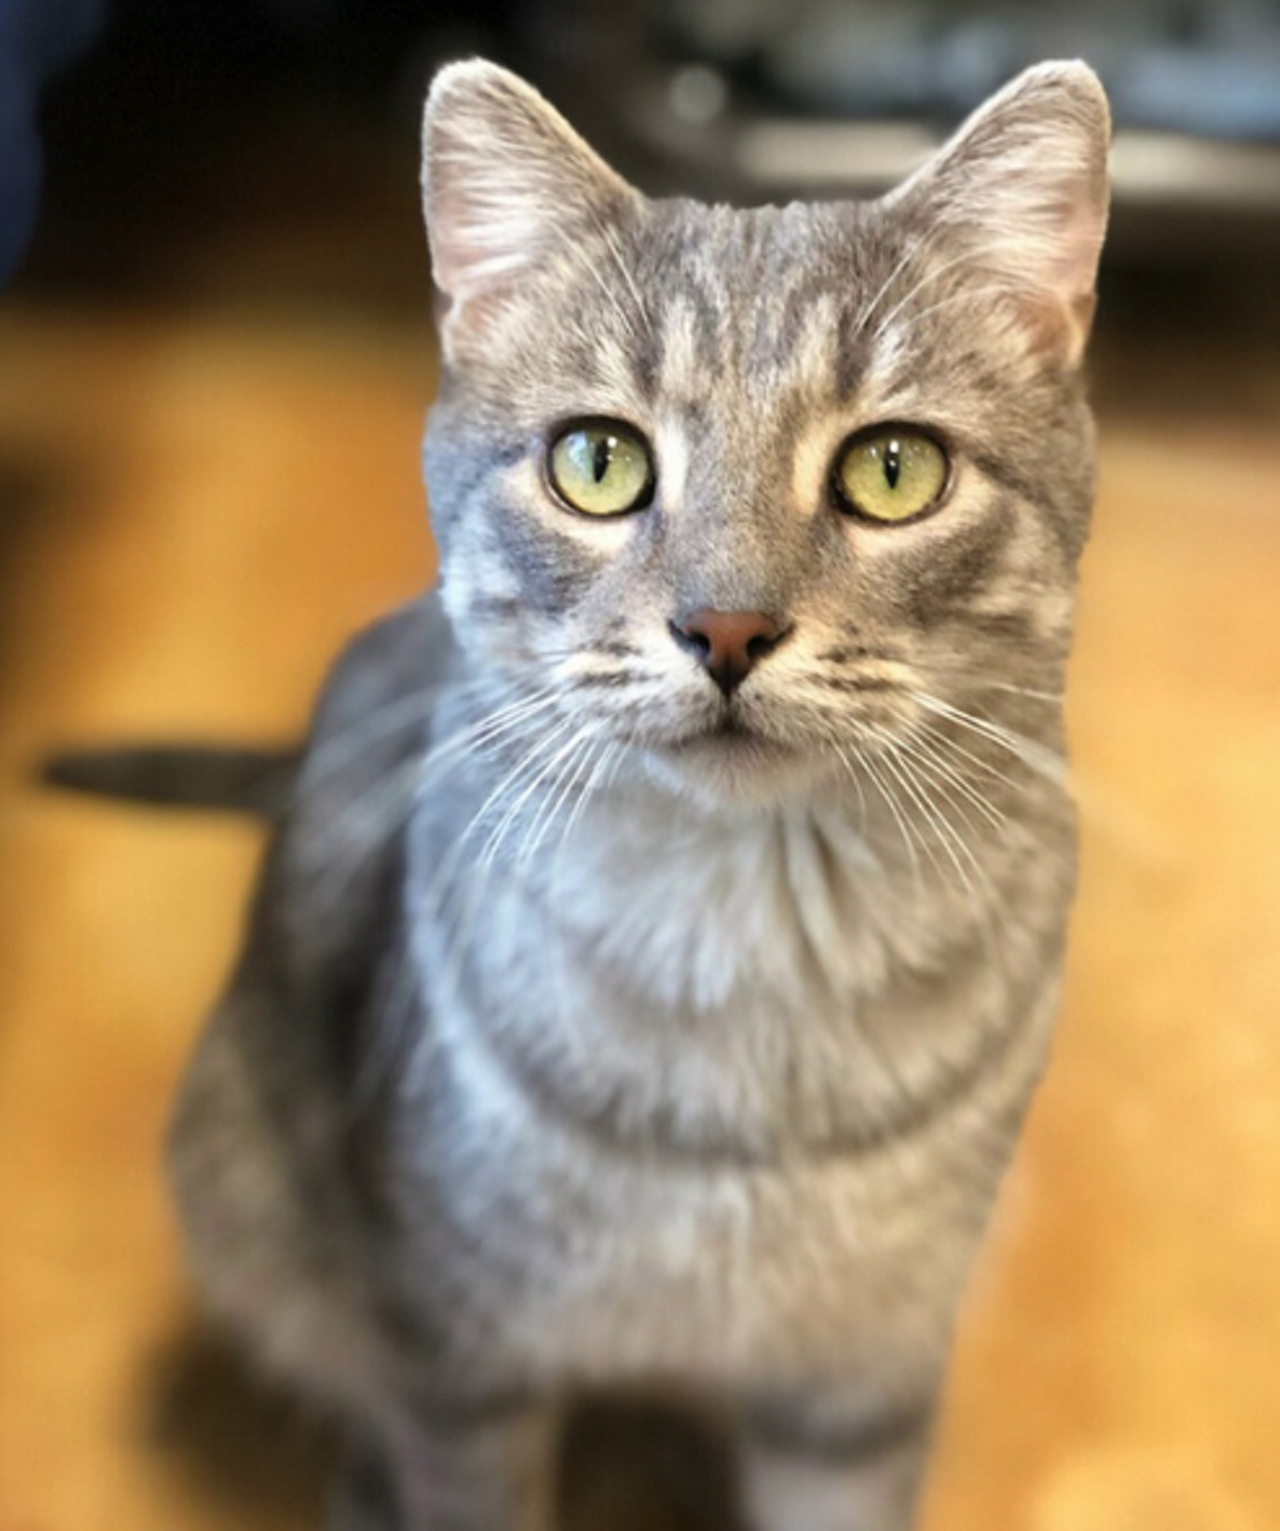 Casper
"Hi, I’m Casper the friendly cat! I’m very affectionate and love cuddling up to new friends. I’m pretty active too and love a good climbing tree. But what do I really love? Treats!  But what I would love even more is a forever home with you!"